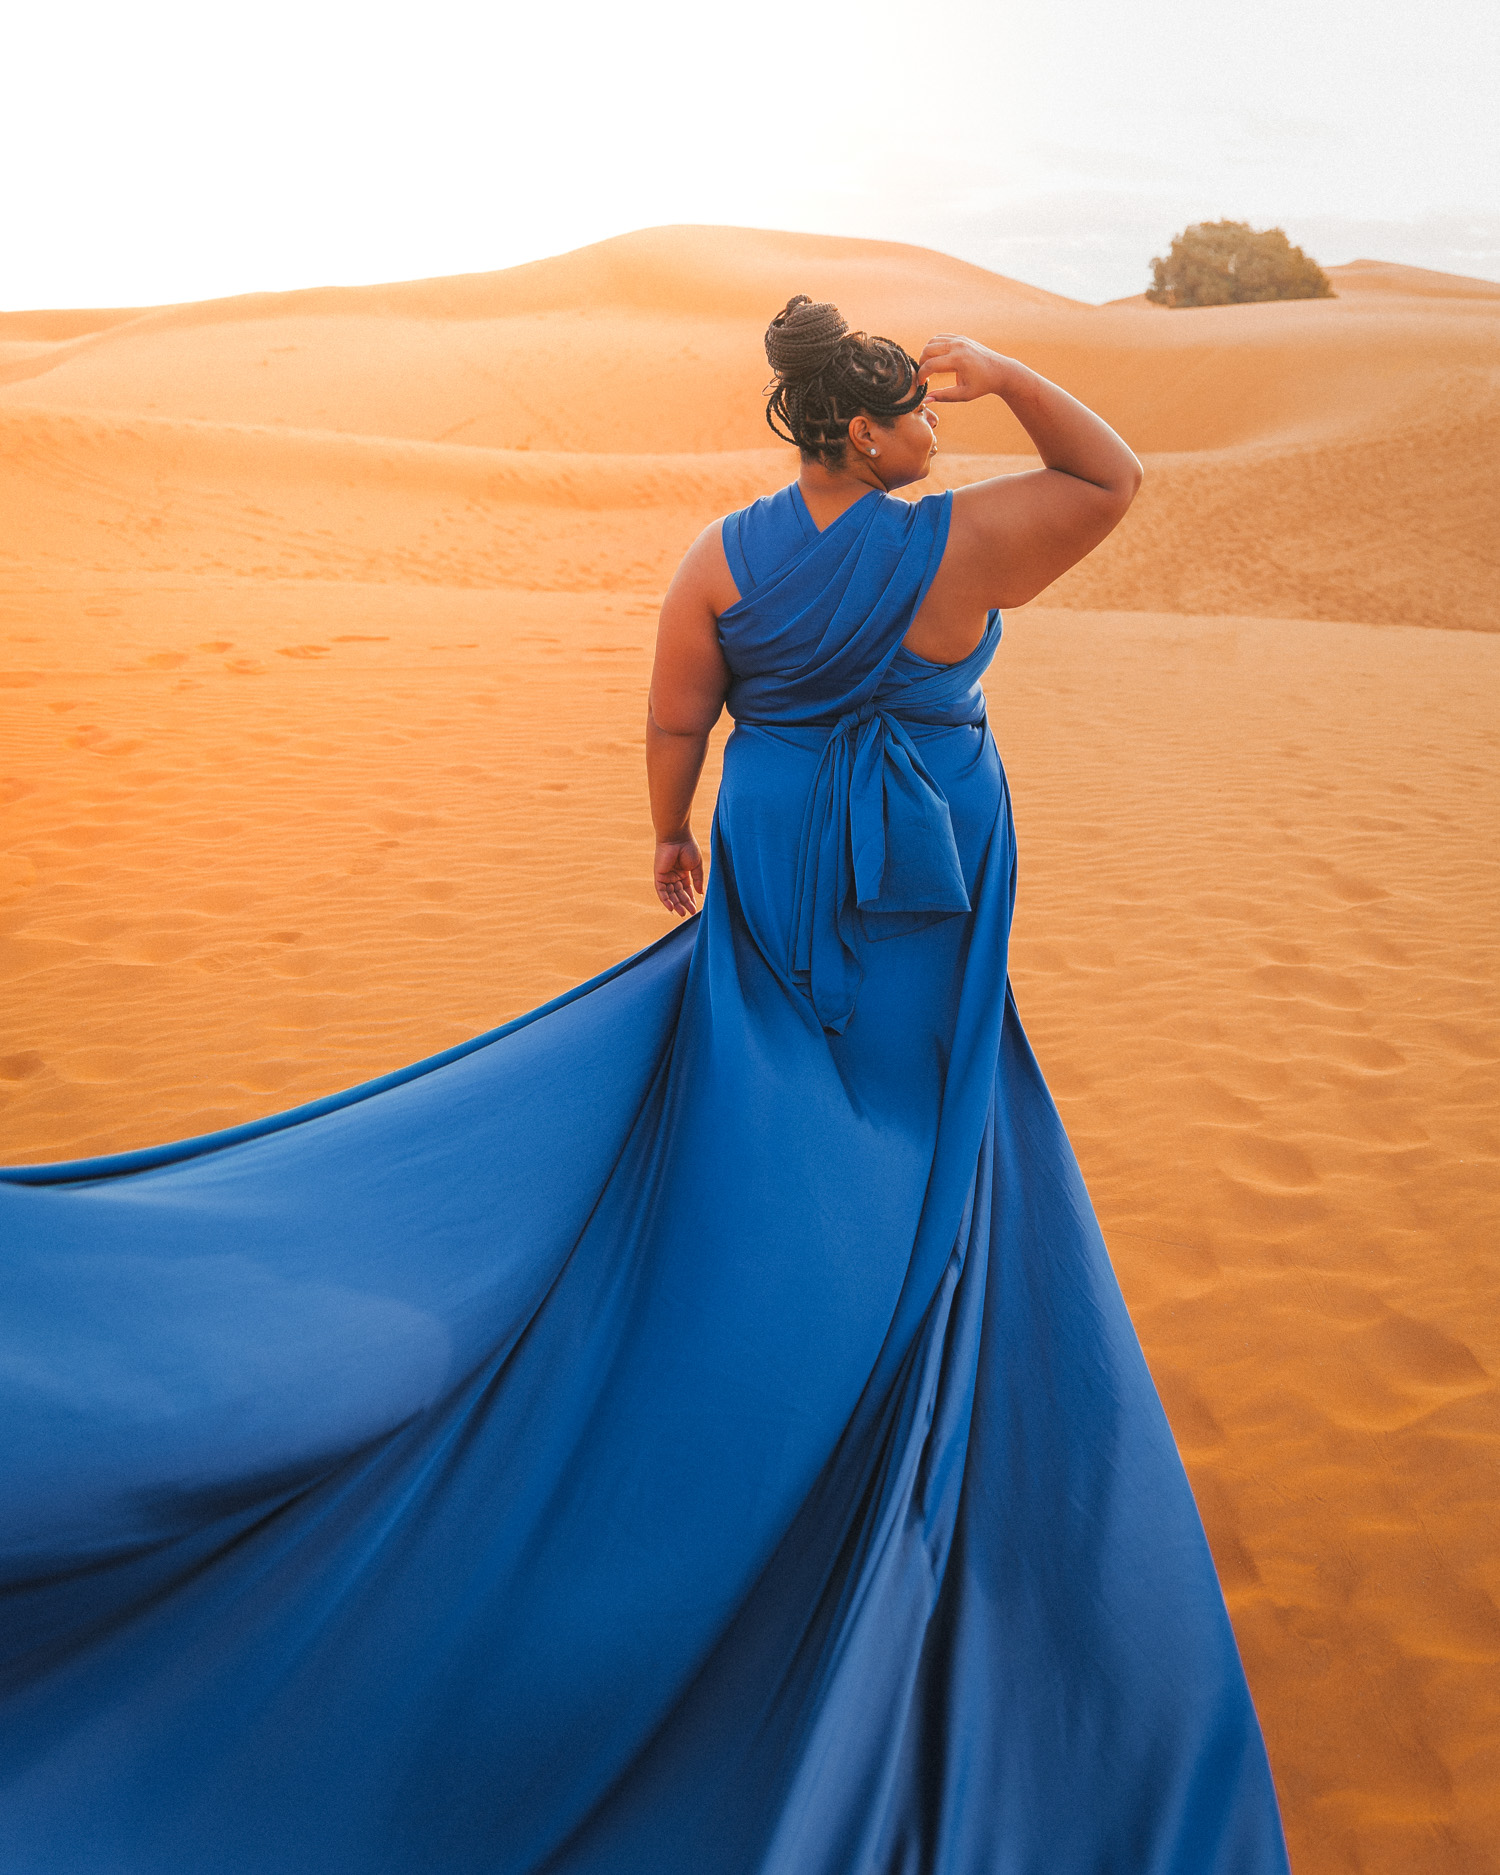 Sunrise in the Sahara, Morocco; woman in a blue flying dress